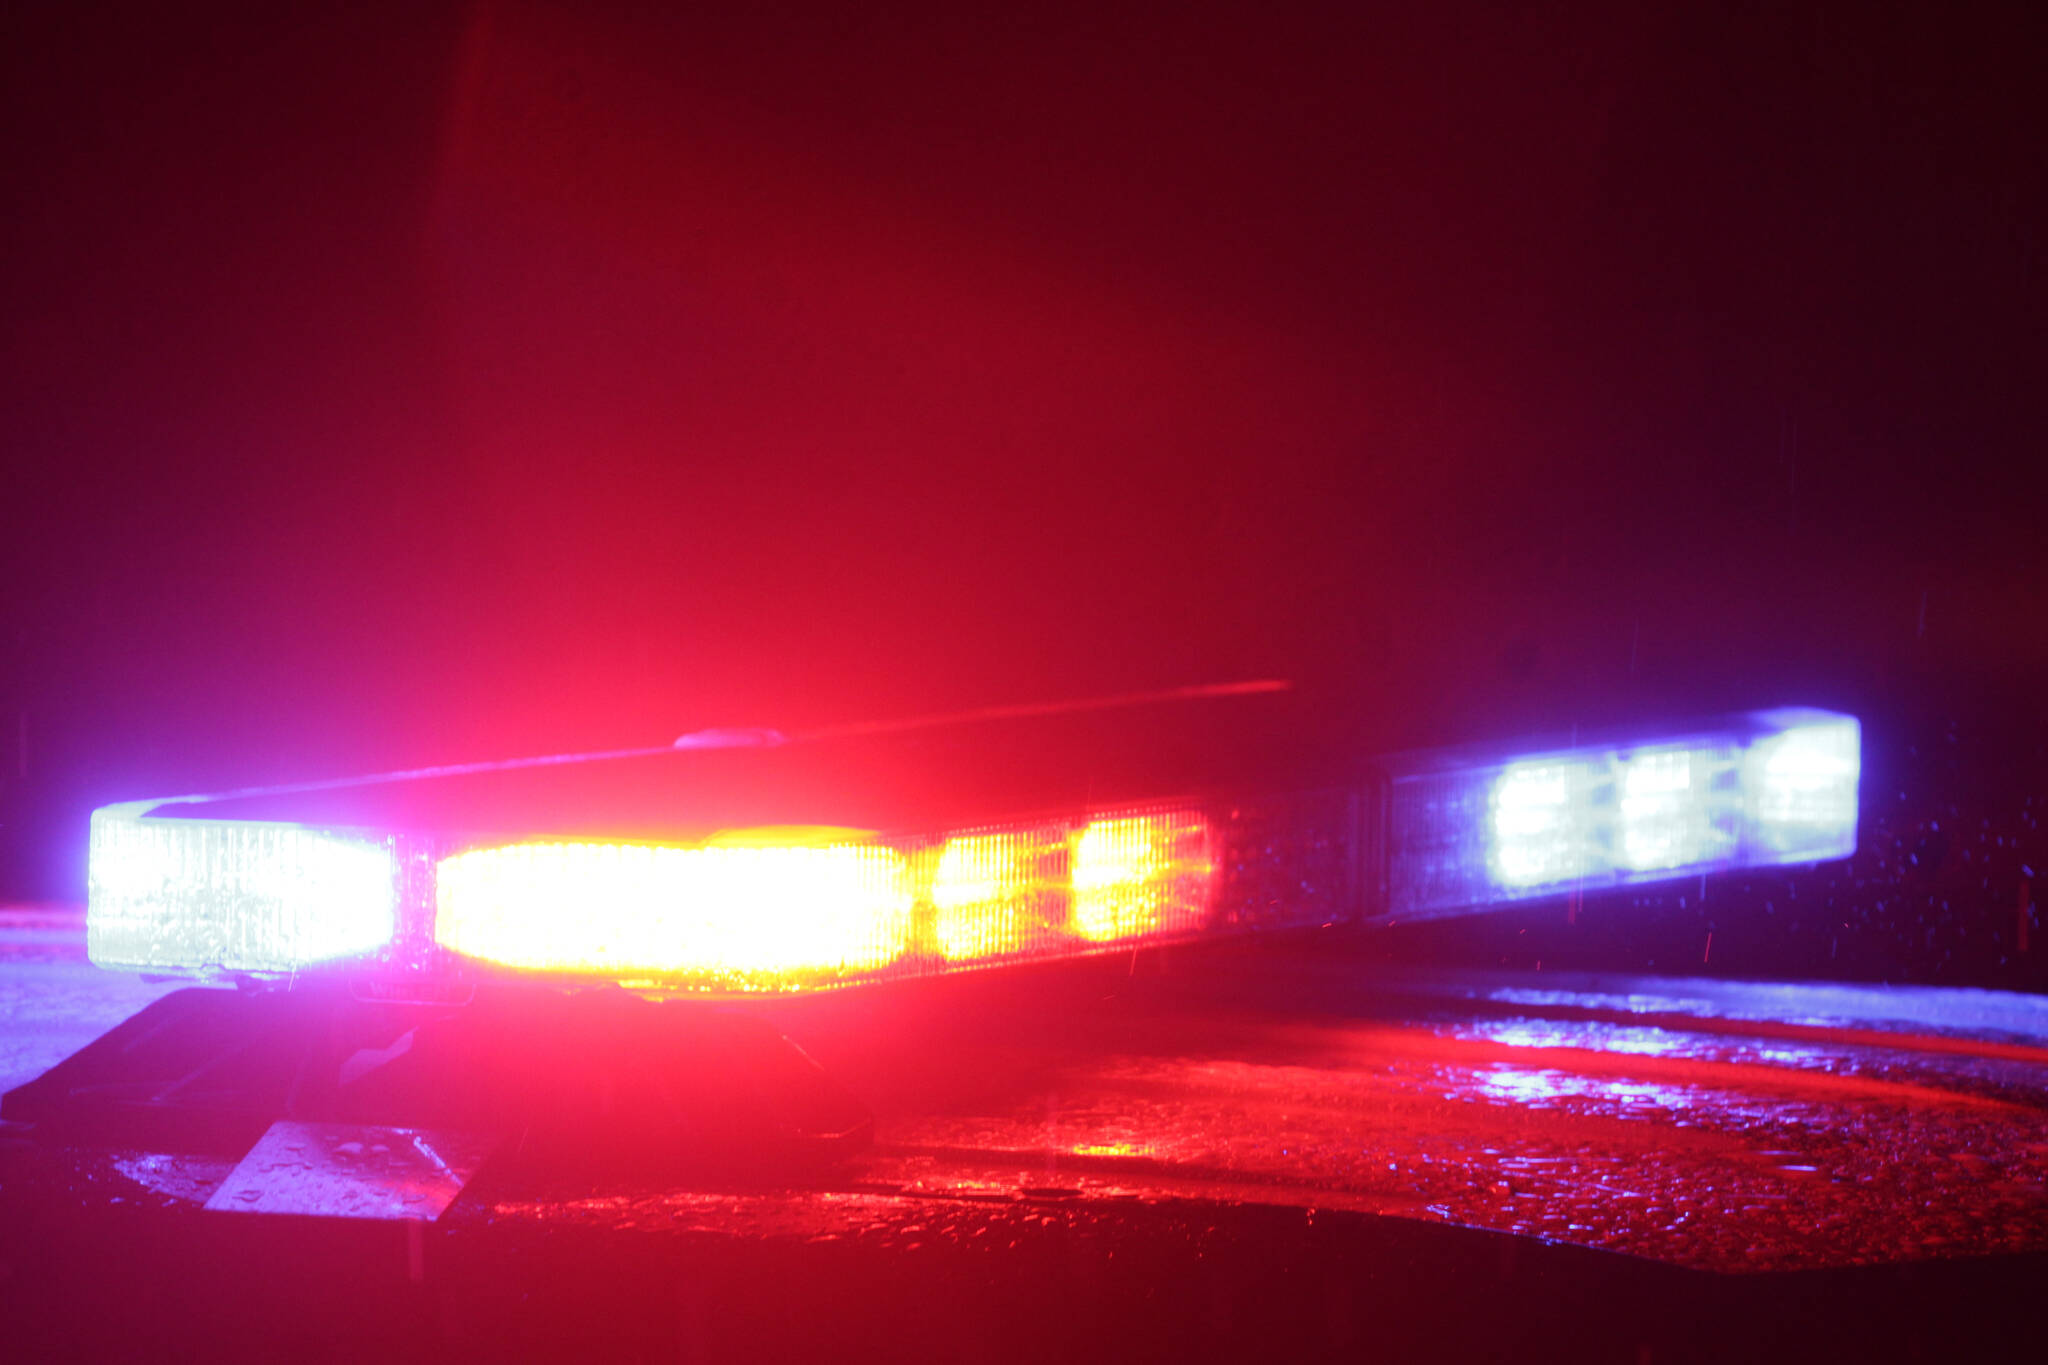 A McCleary man was involved in a single-vehicle, alcohol-involved crash early Sunday morning. (Michael S. Lockett / The Daily World file)